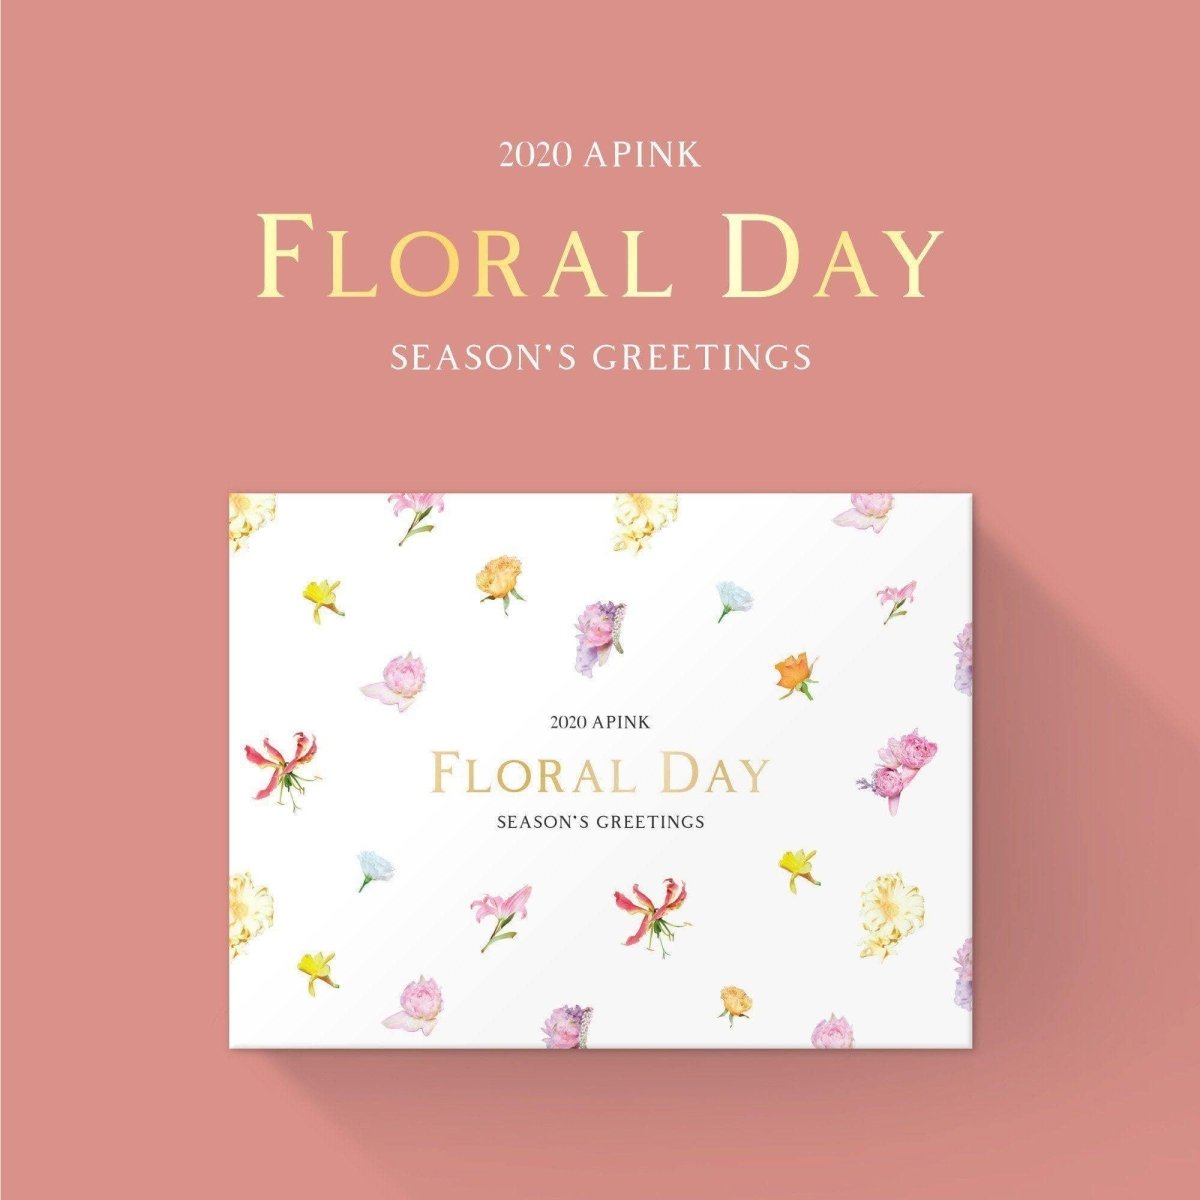 Apink - 2020 SEASON'S GREETINGS [FLORAL DAY] - KAVE SQUARE